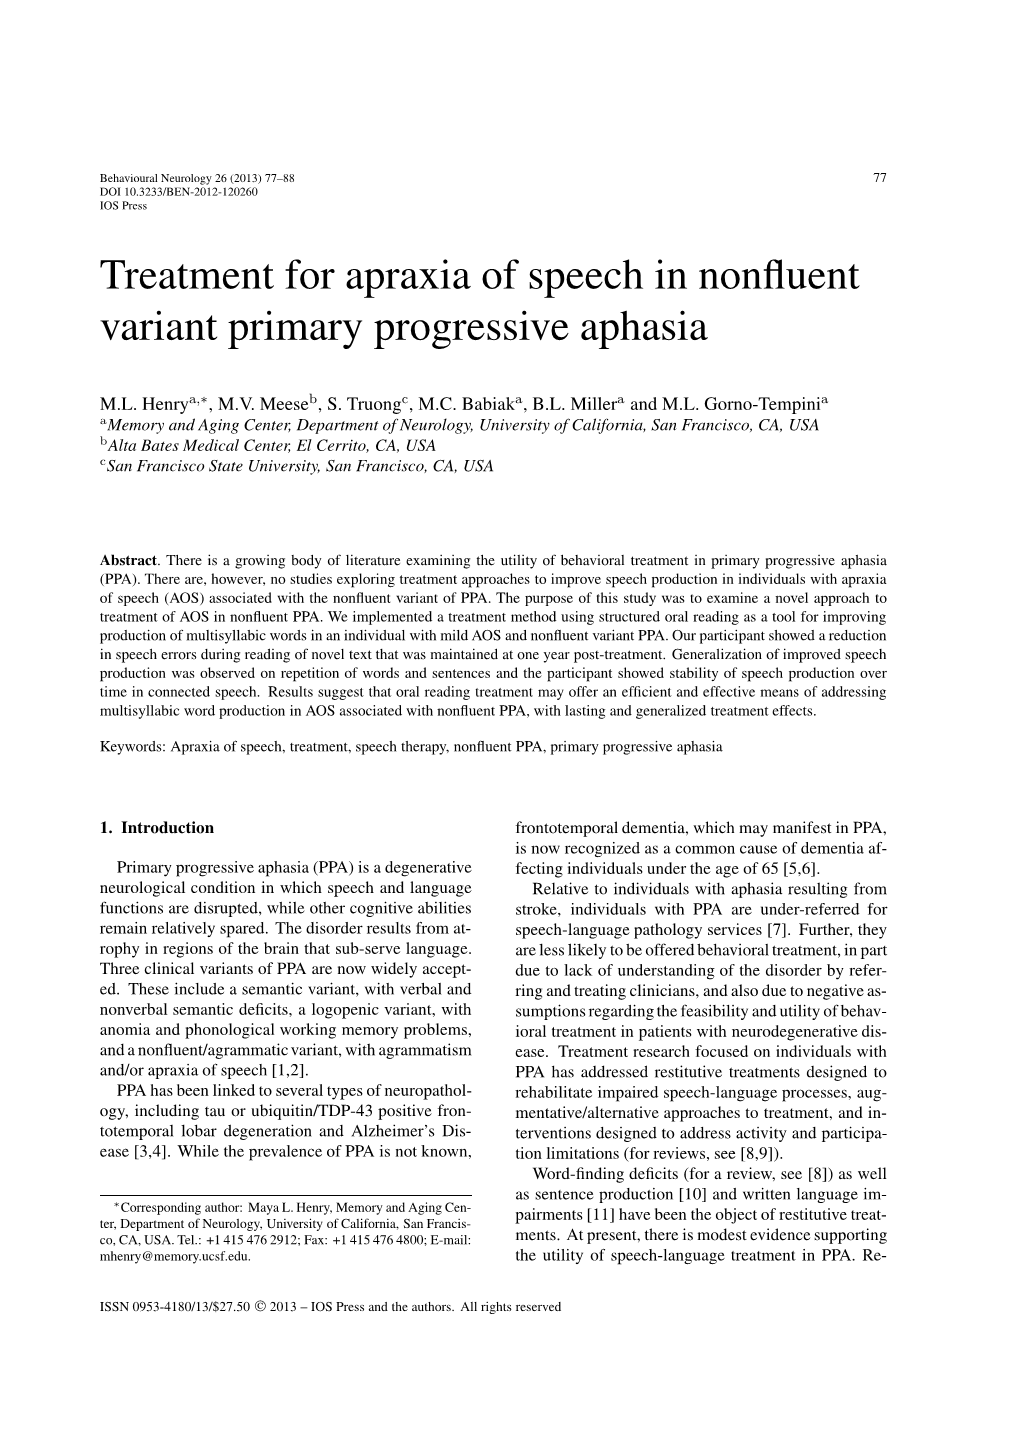 Treatment for Apraxia of Speech in Nonfluent Variant Primary